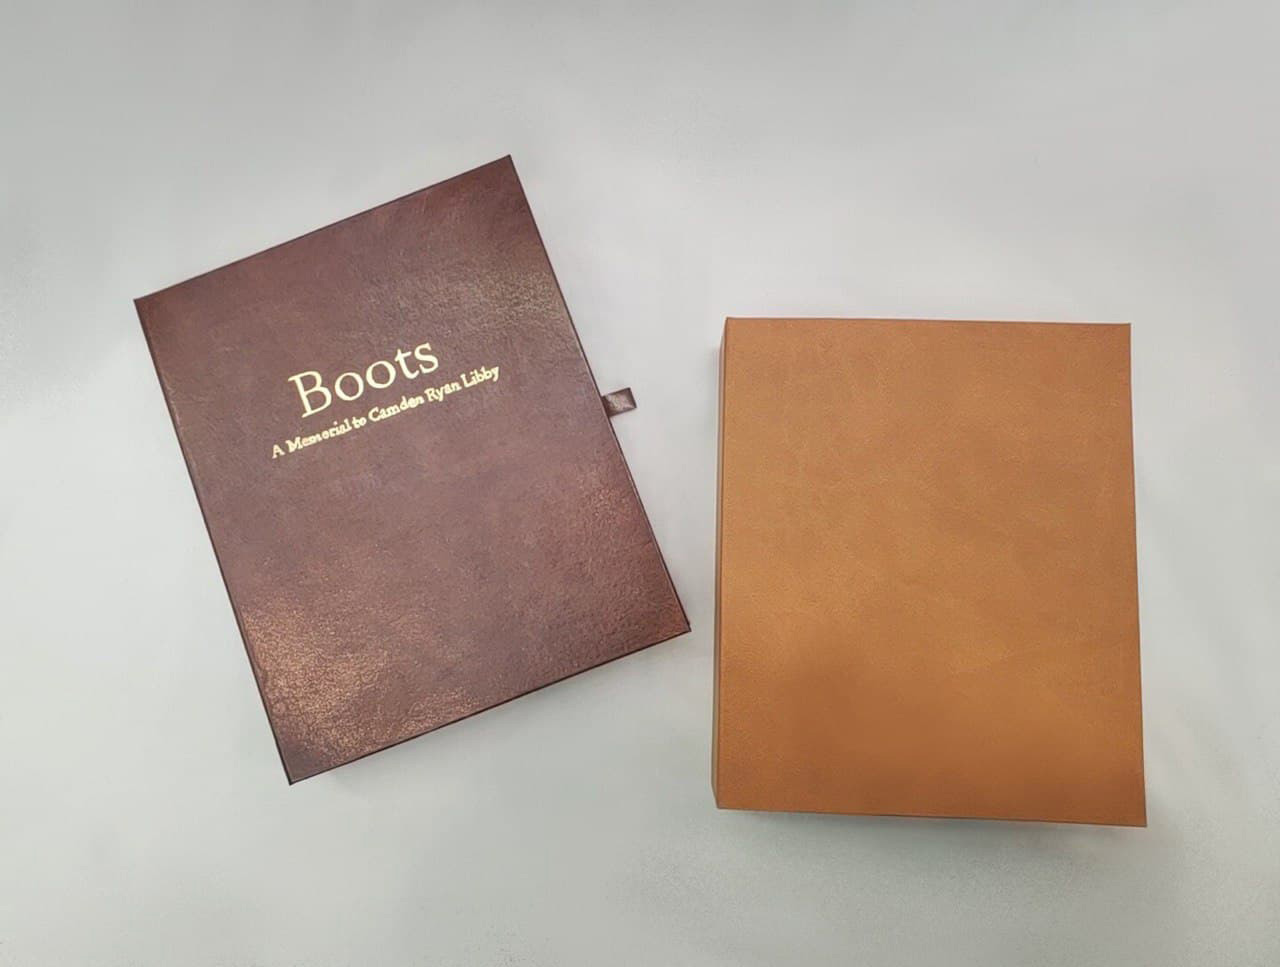 2 artist books lying flat on light gray surface; left book dark red with gold title reading 'Boots: A Memorial to Camden Ryan Libby', right book sienna brown